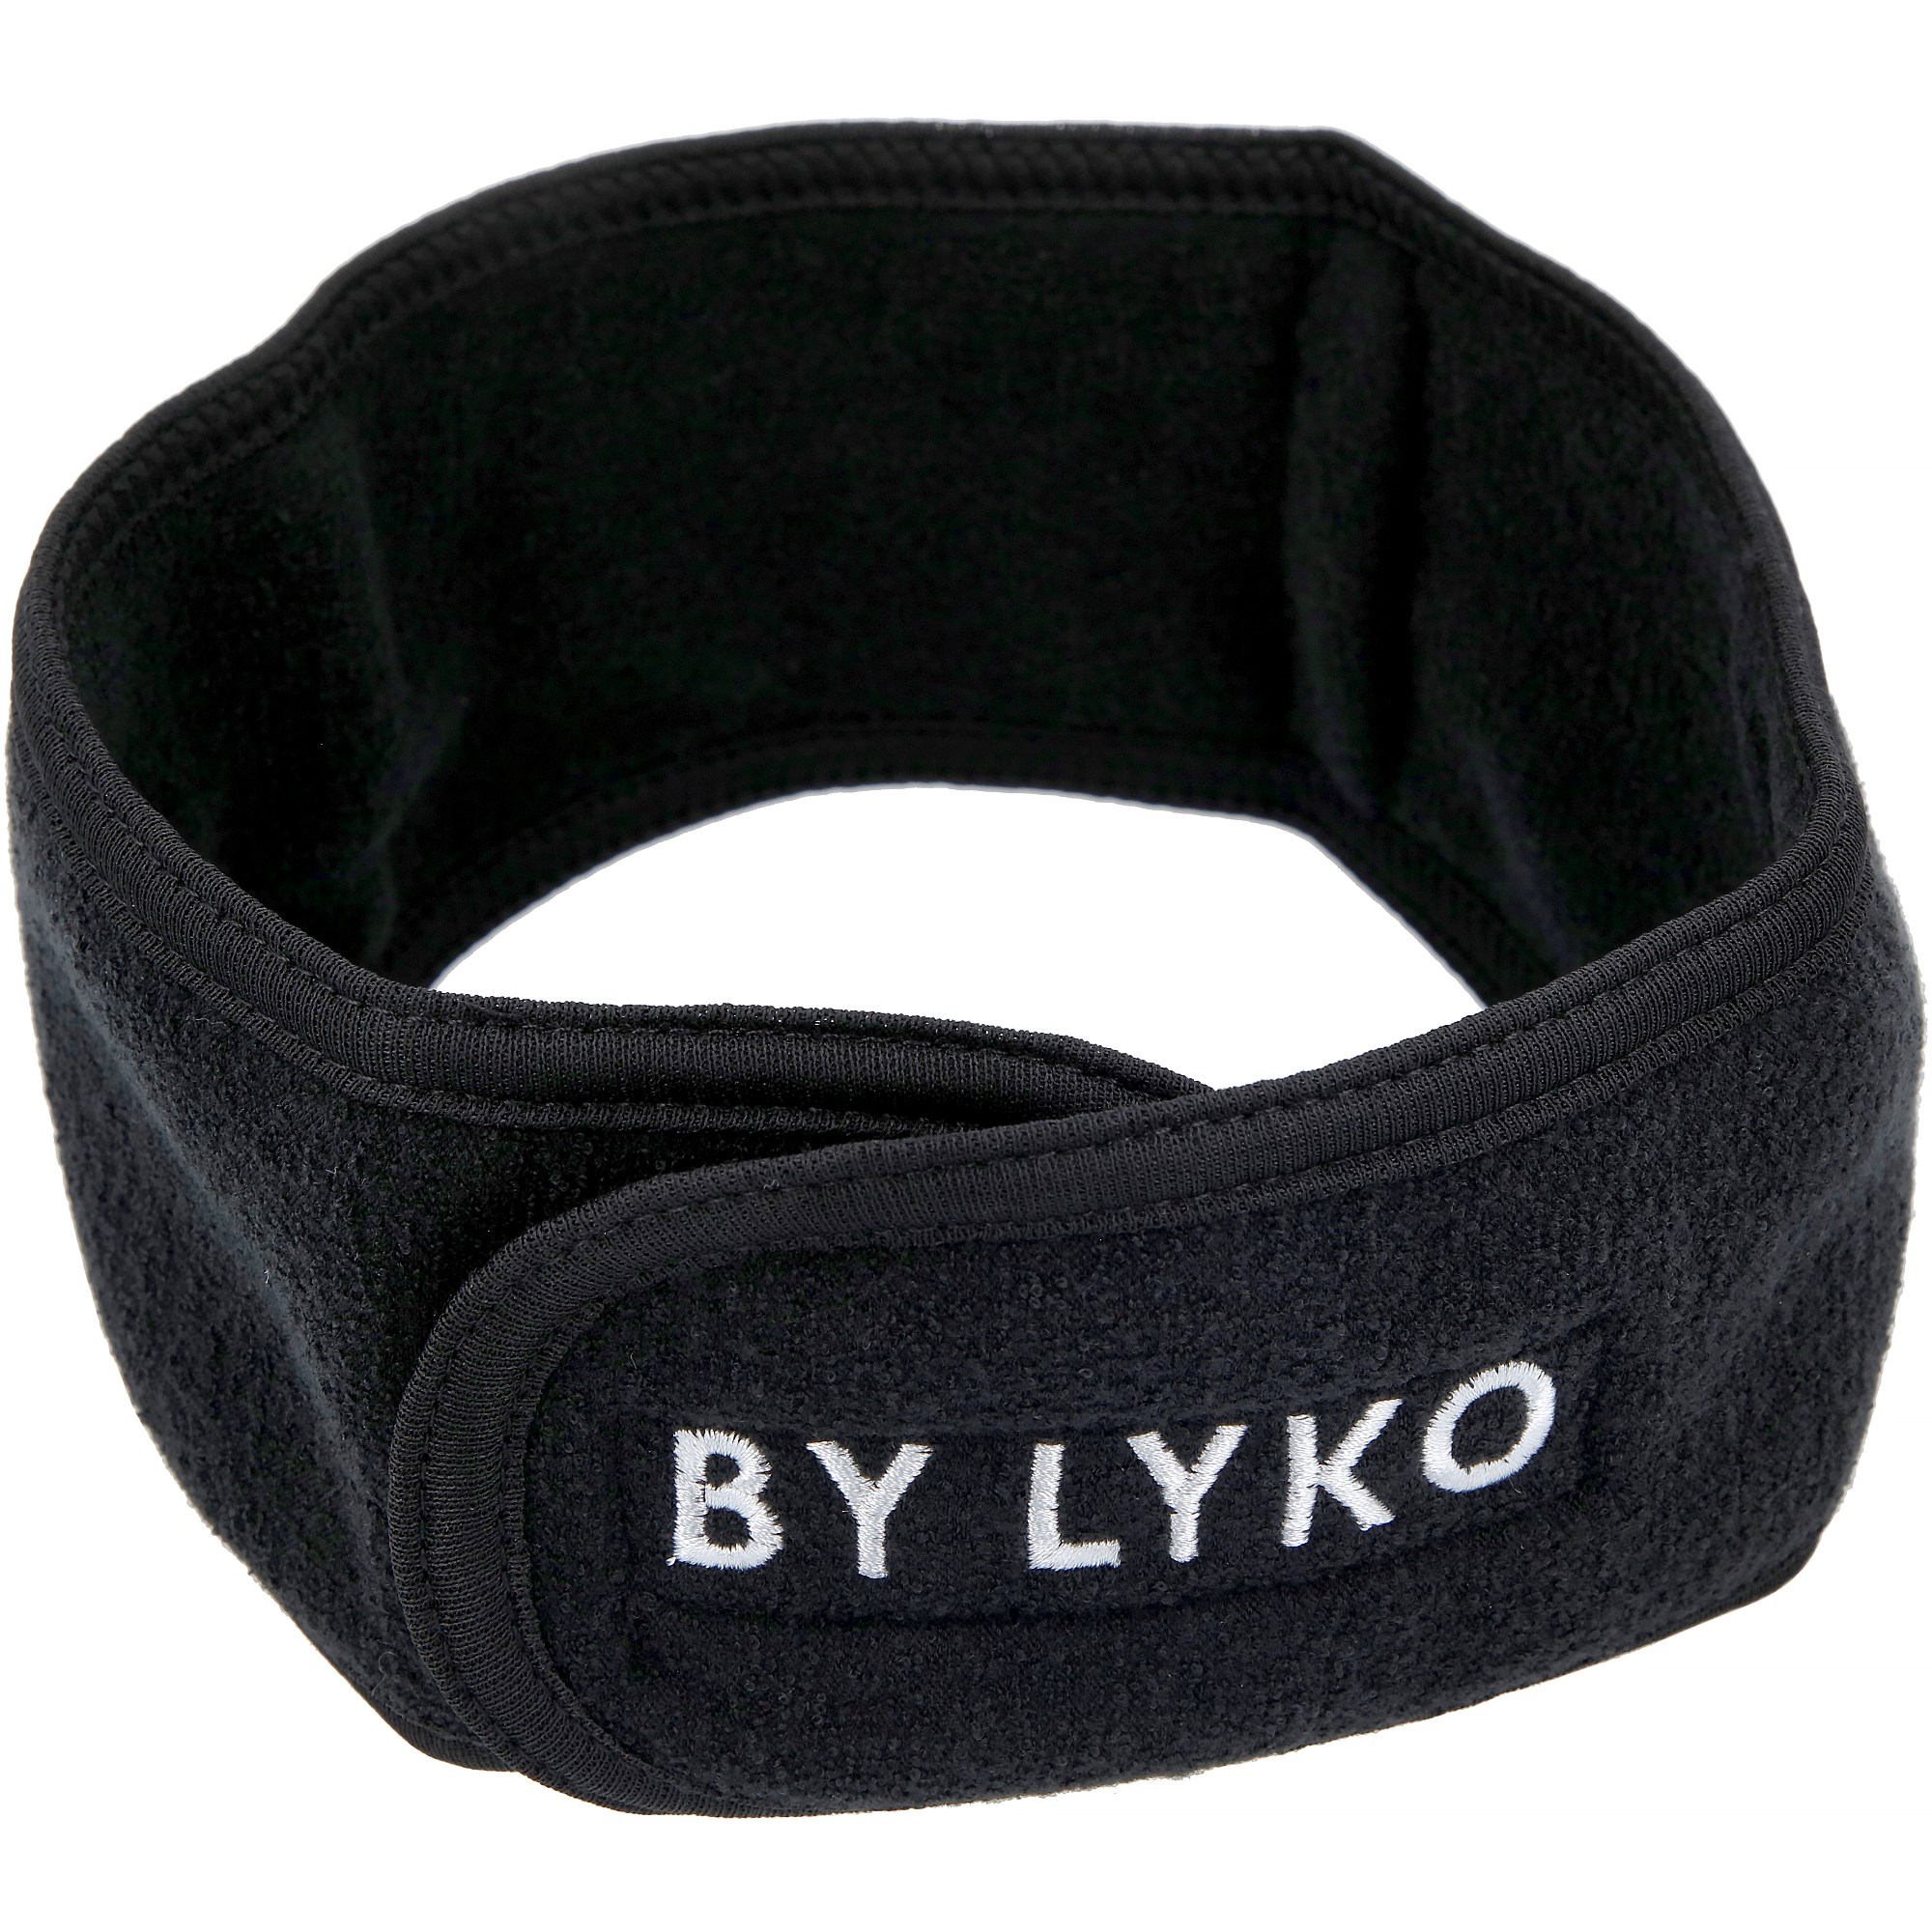 Läs mer om By Lyko Makeup Band BY LYKO Black